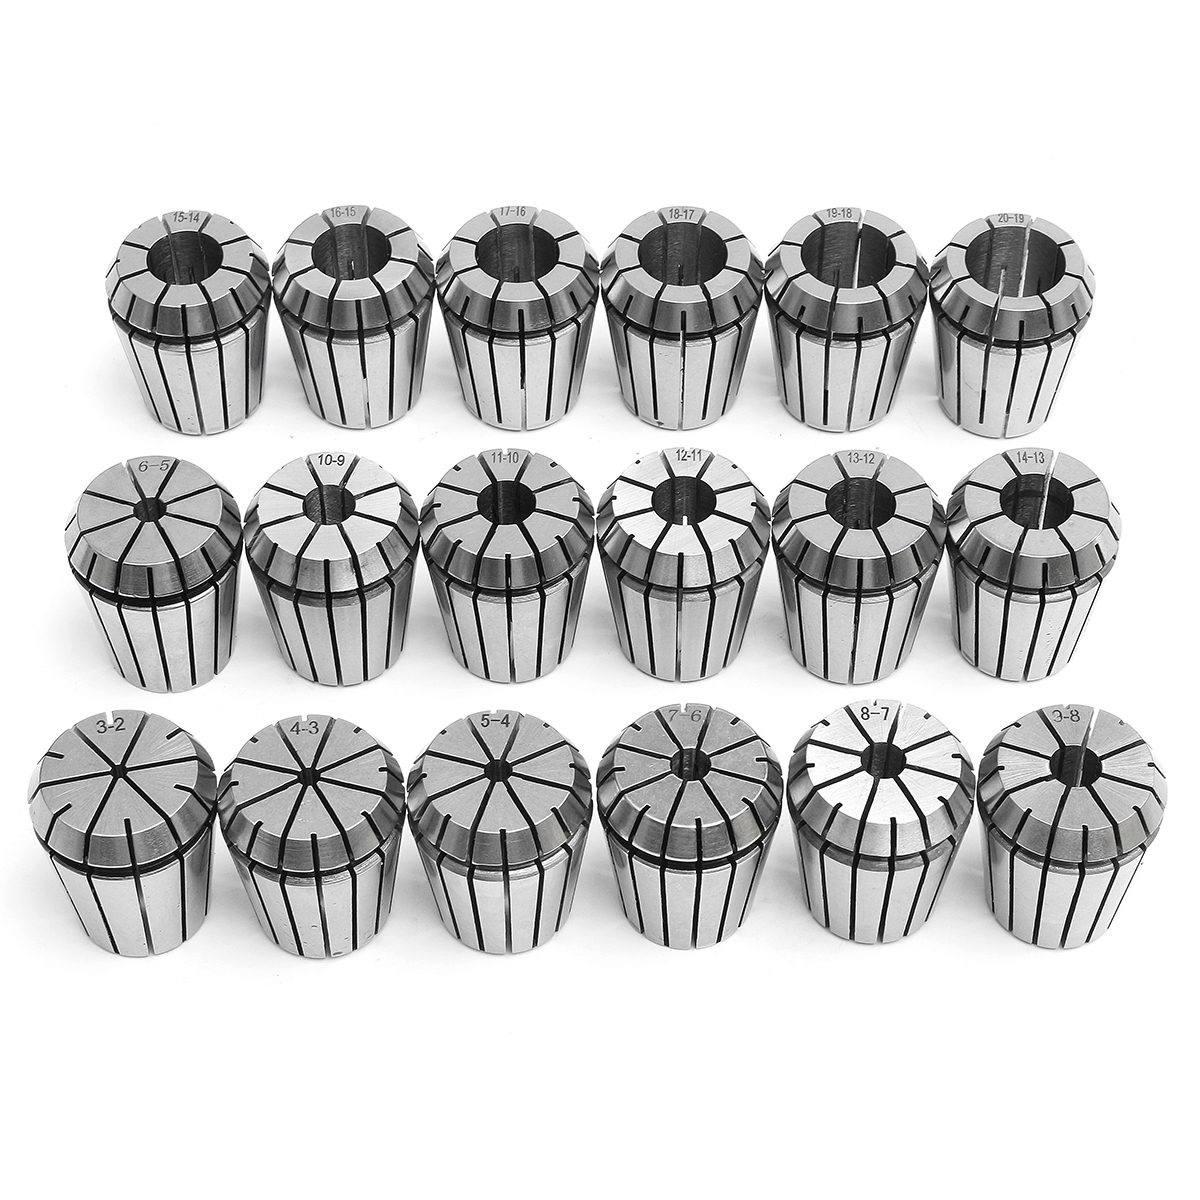 18pcs-3-20mm-Collects-Set-MTB3-ER32-Collet-Chuck-Set--12-Inch-Thread-with-Chuck-And-Spanner-1162136-6